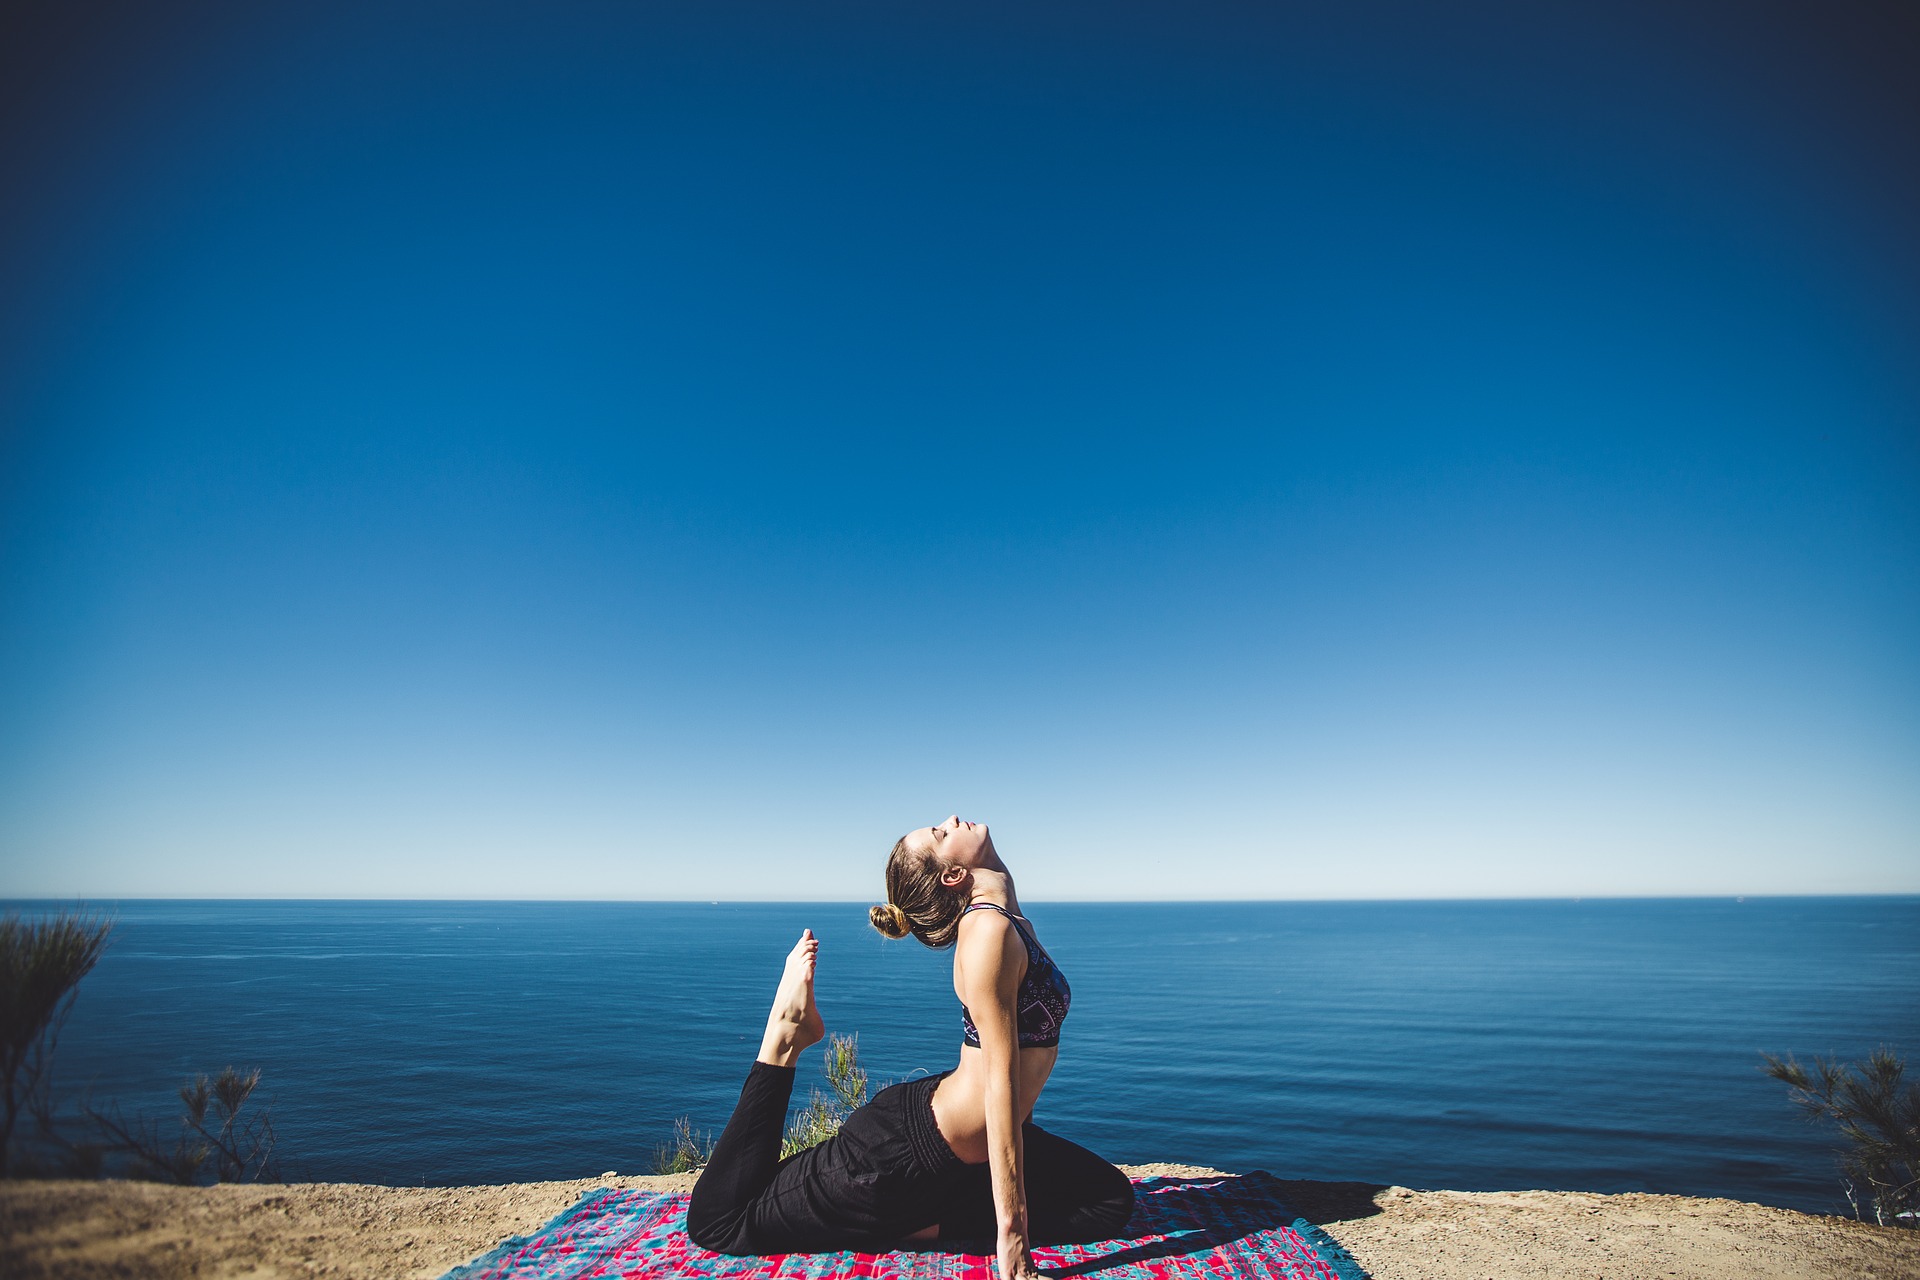 Discover Yoga in the open air